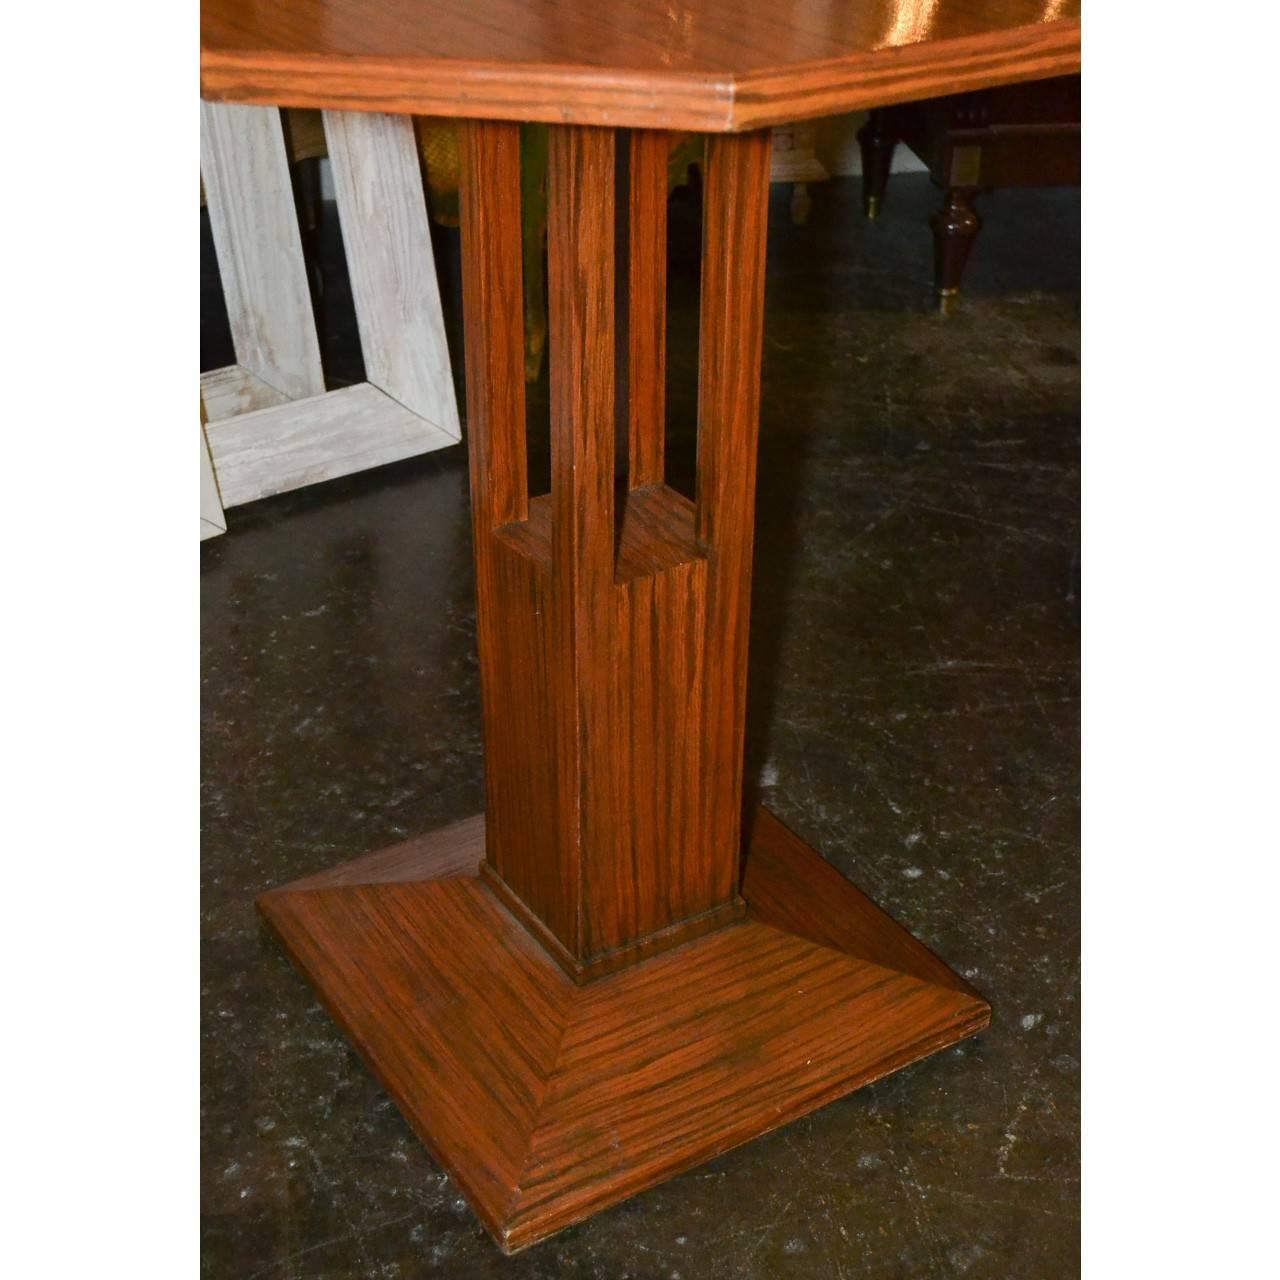 Nice quality Mid-century tiger oak table or display stand/pedestal with octagonal shaped top,

circa 1940.
 